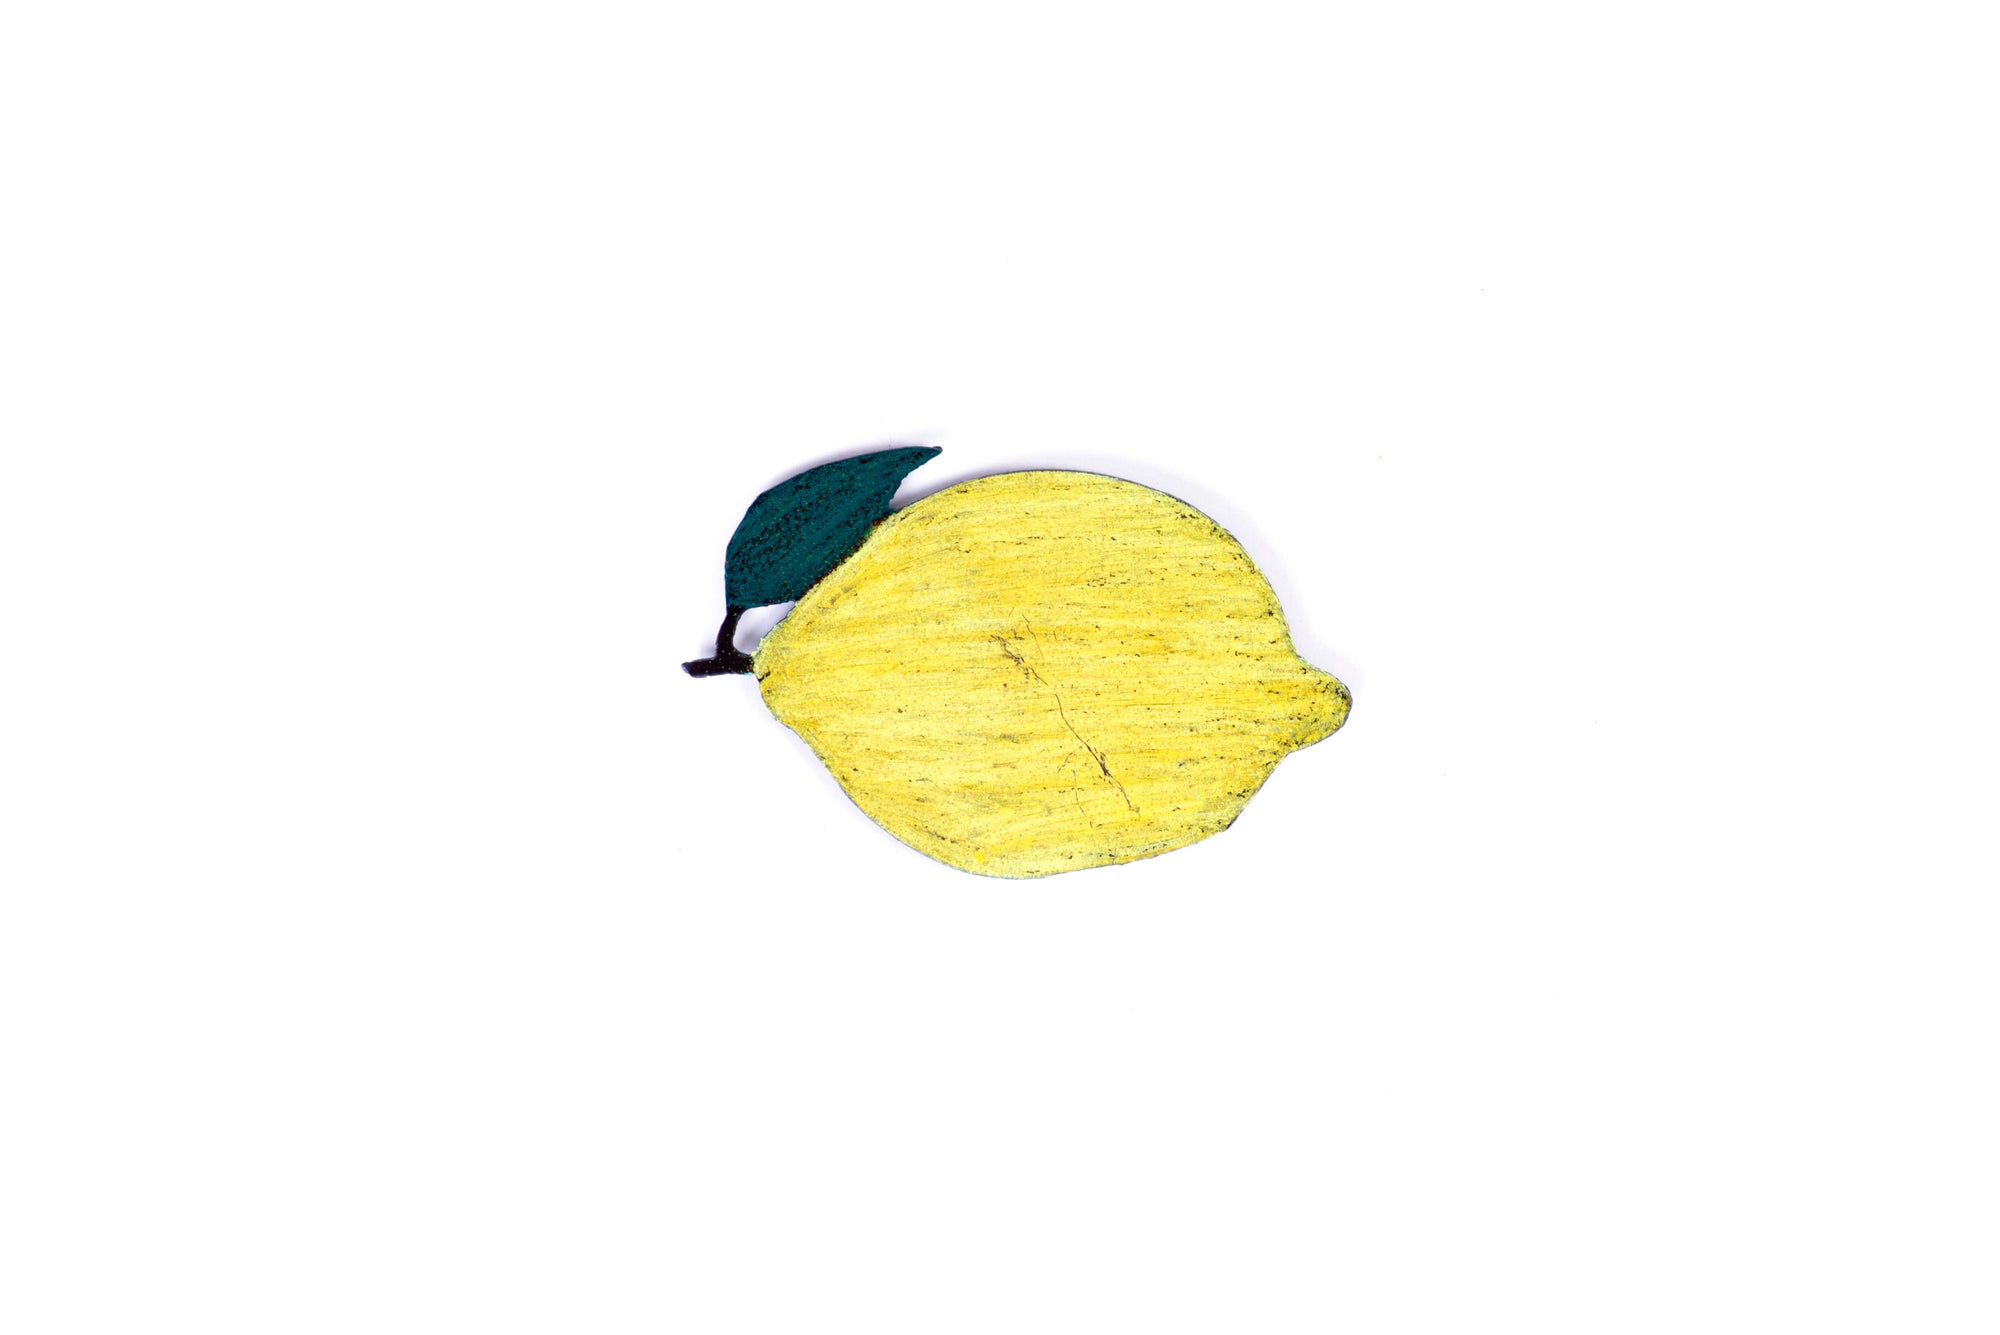 A horizontal flat metal lemon painted yellow. It has a short stem and a green leaf on the left end.